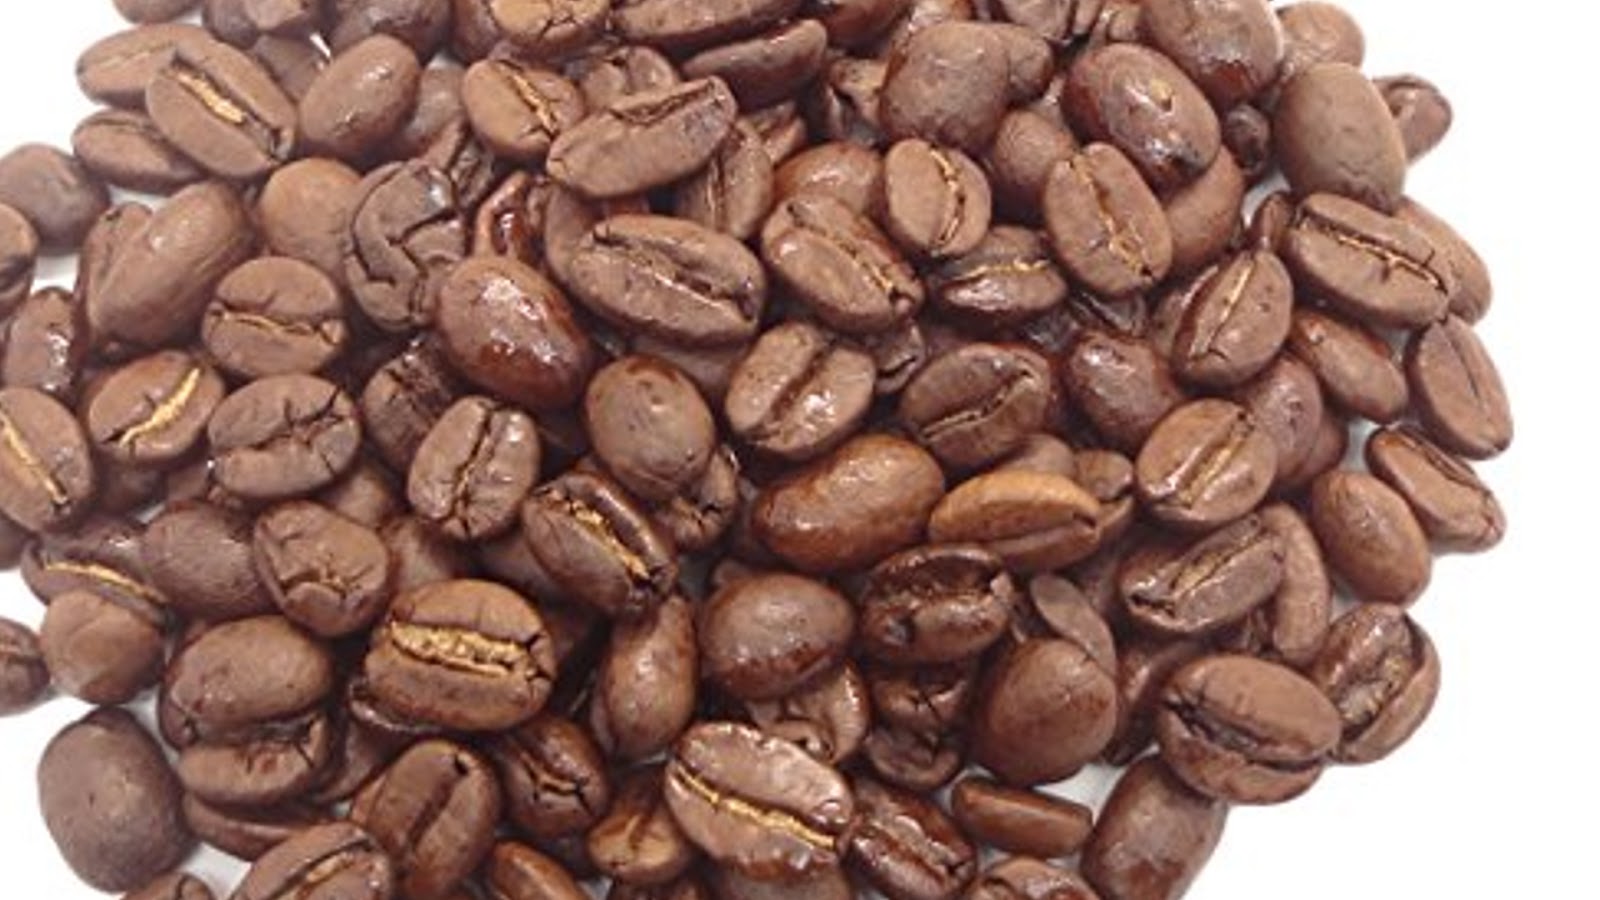  types of coffee beans